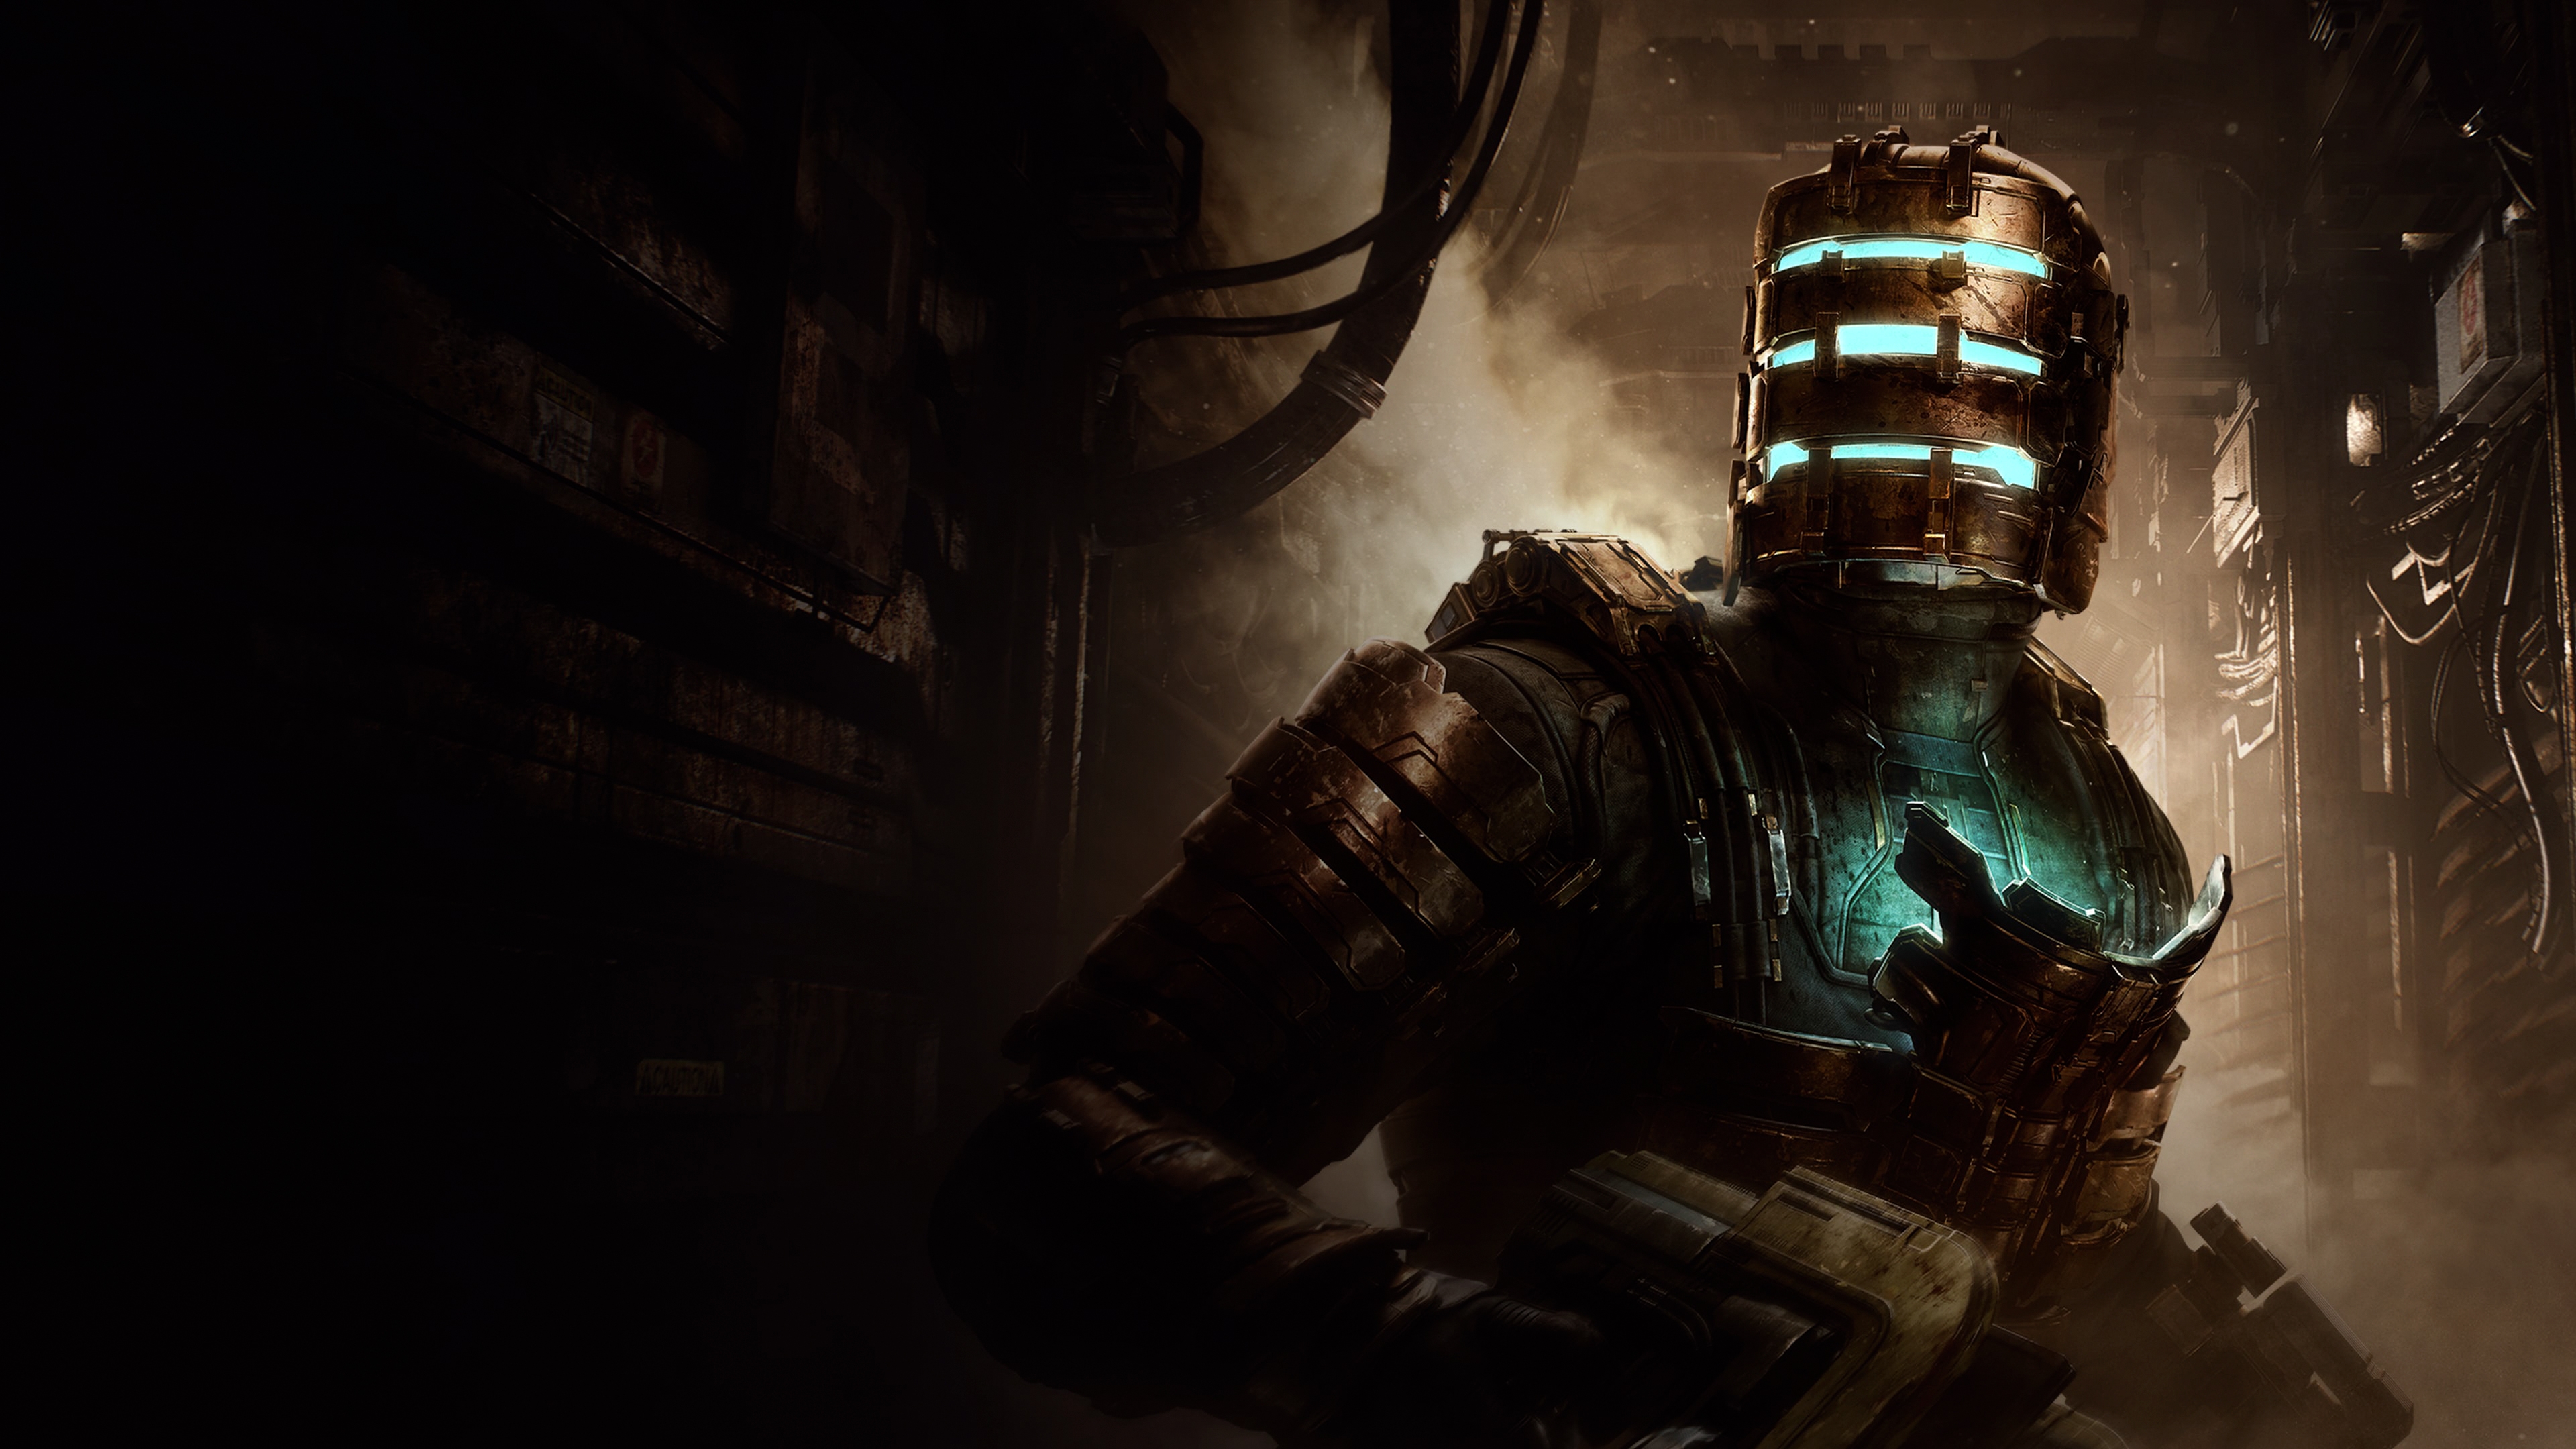 HD wallpaper, Xbox Series X And Series S, Dead Space, Playstation 5, Pc Games, 2023 Games, Isaac Clarke